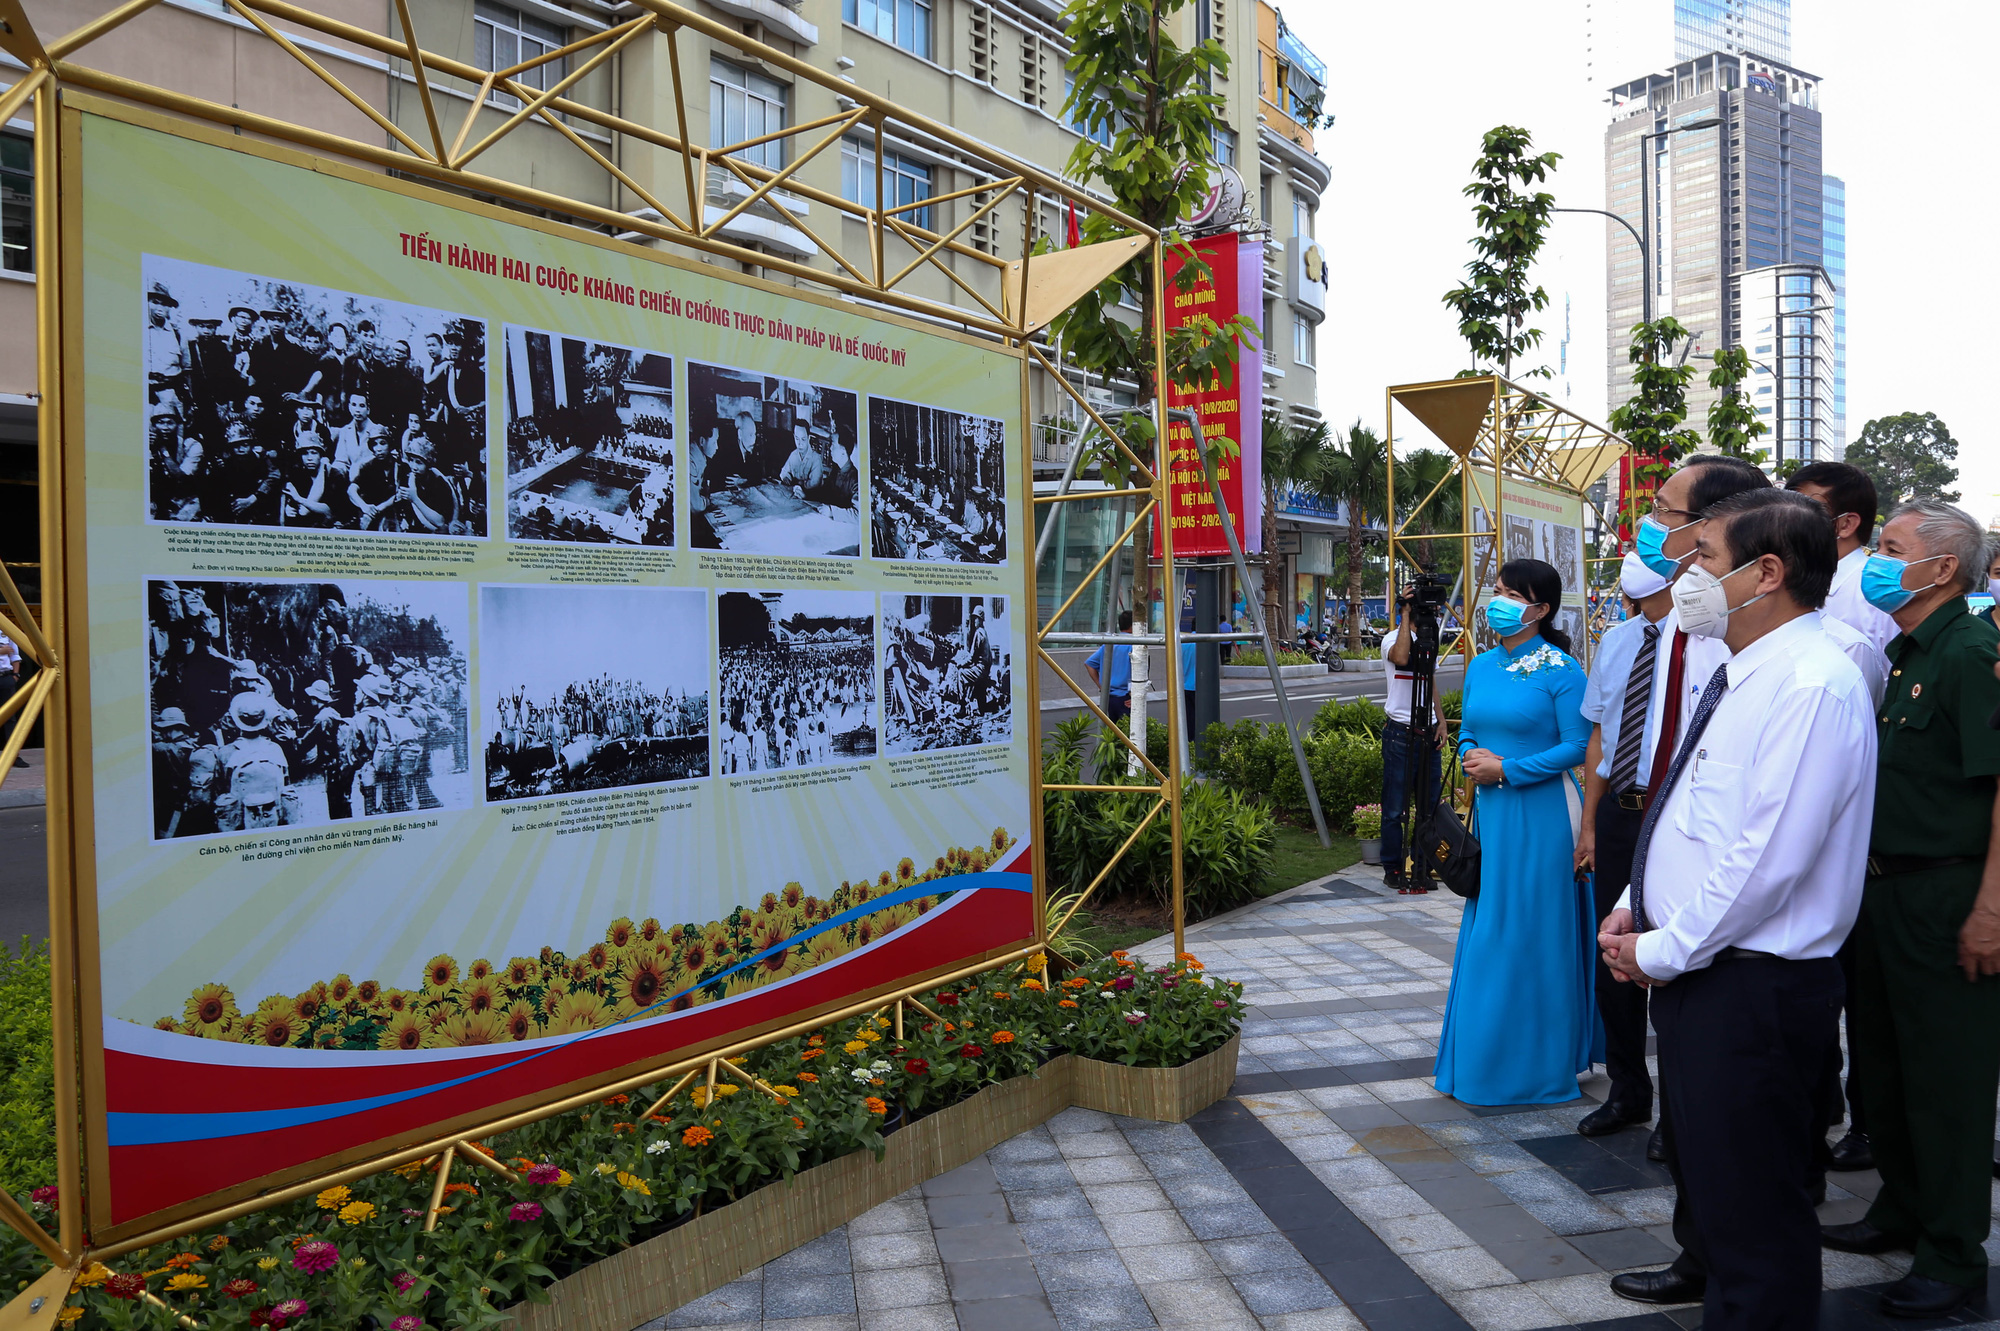 Ho Chi Minh City officials view photos displayed at an exhibition at Lam Son Park in District 1, Ho Chi Minh City, Vietnam, August 26. Photo: Thao Le / Tuoi Tre